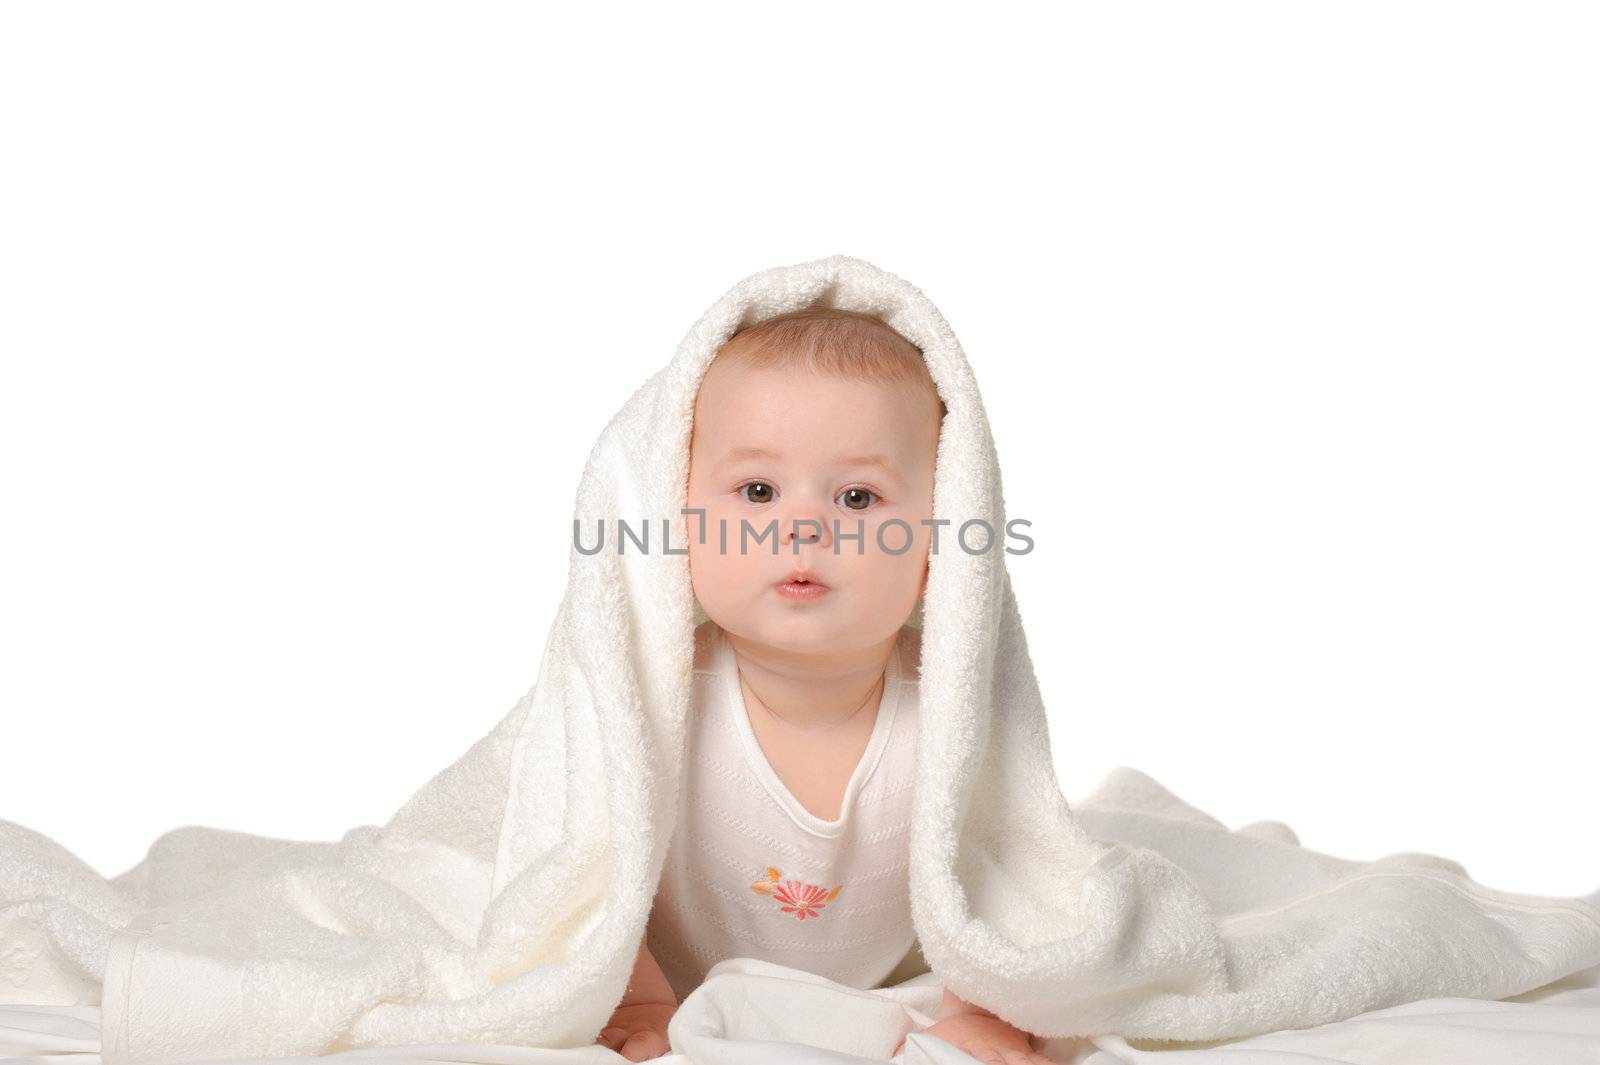 The baby under a towel. Age of 8 months. It is isolated on a white background